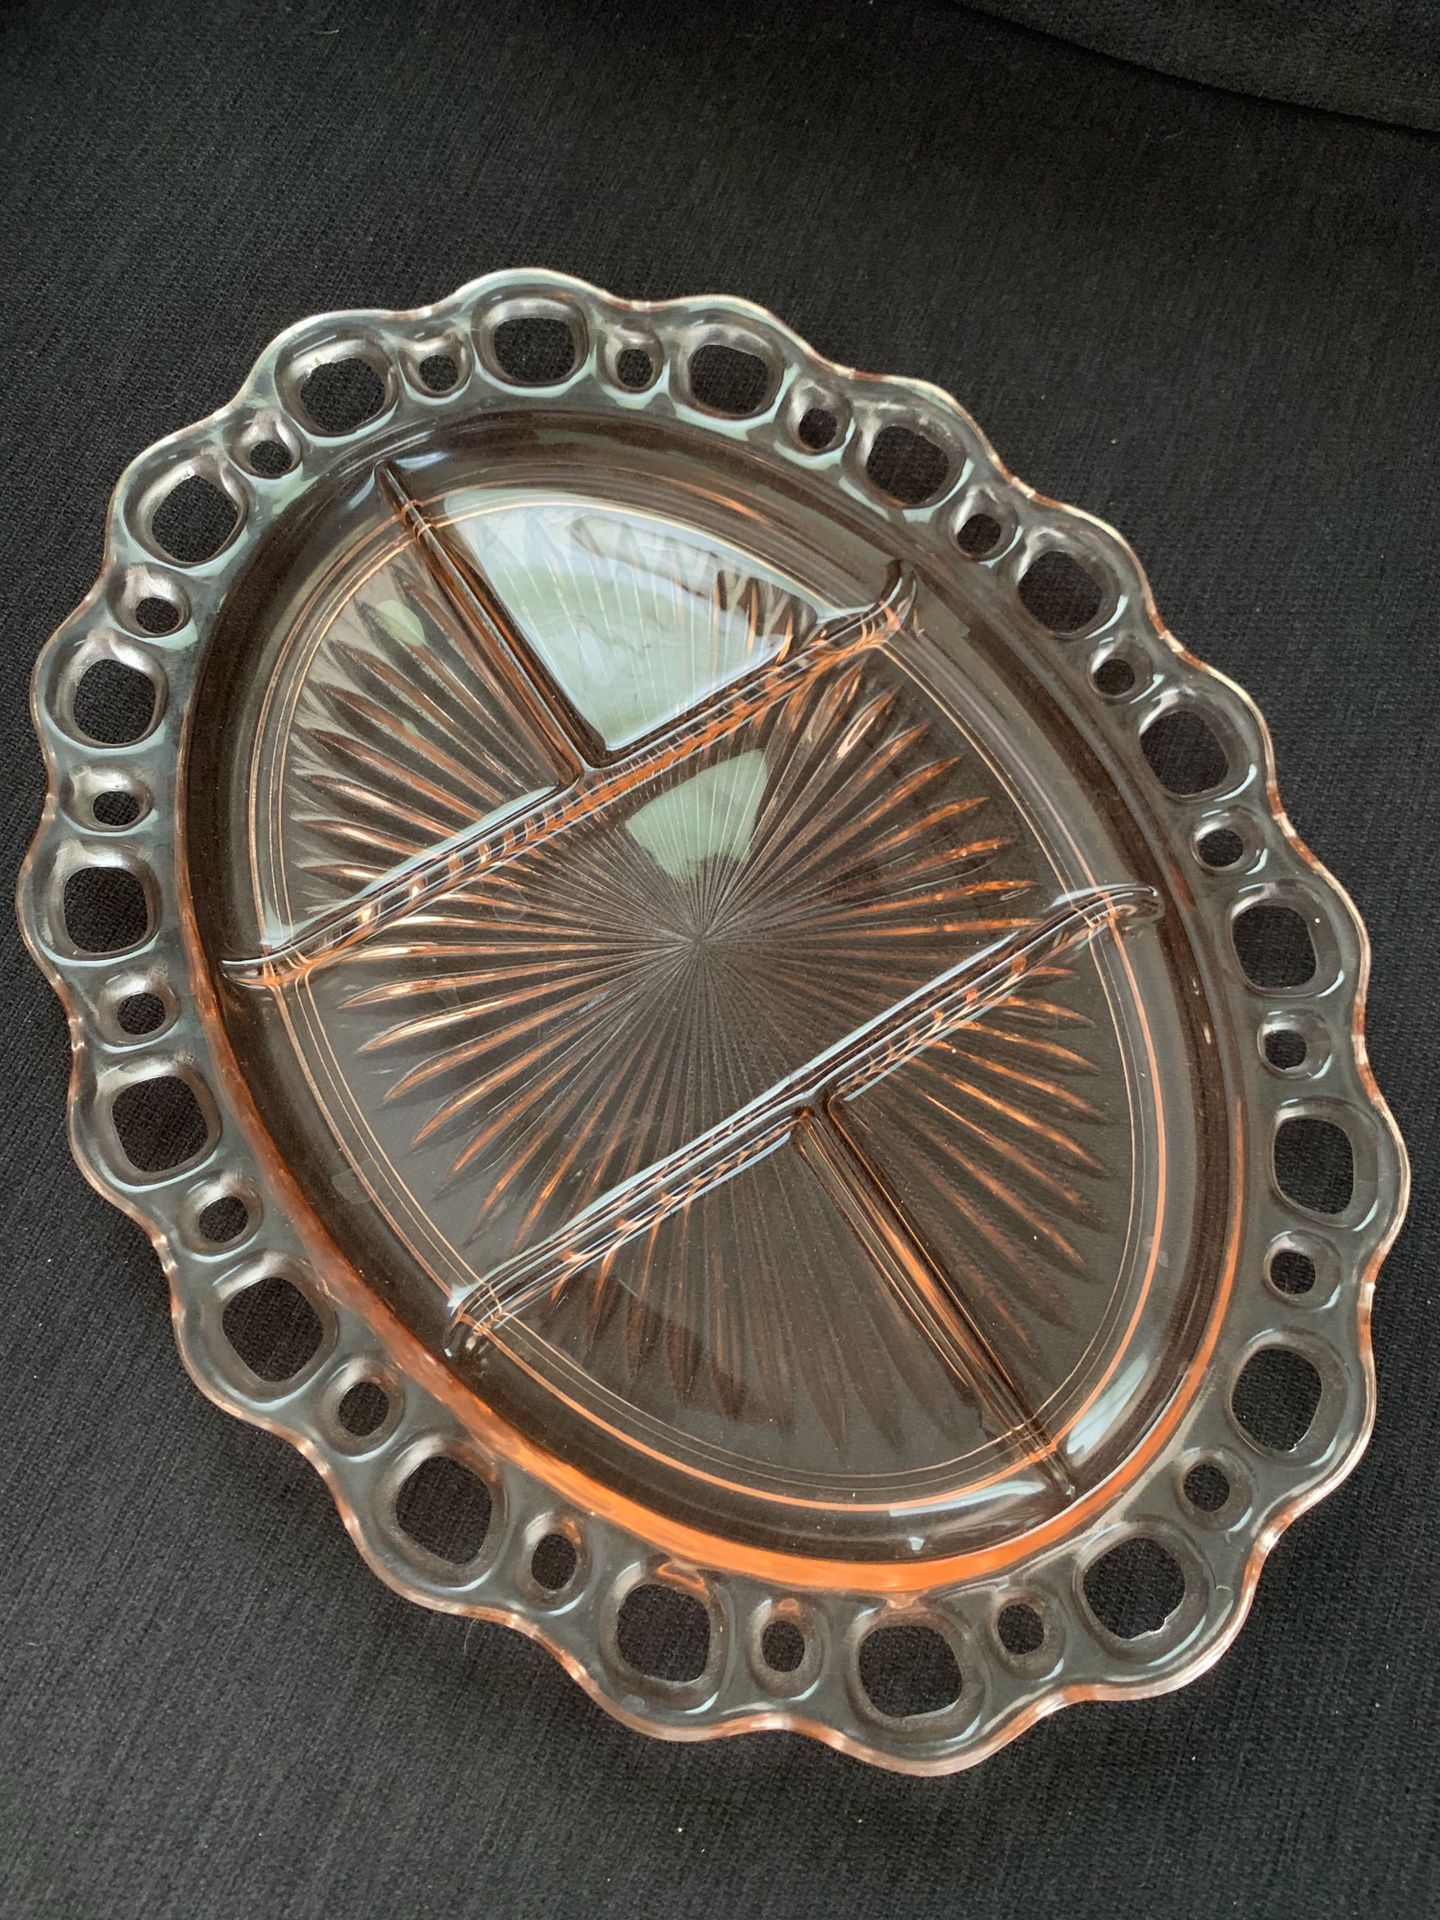 Vintage peach glass serving tray